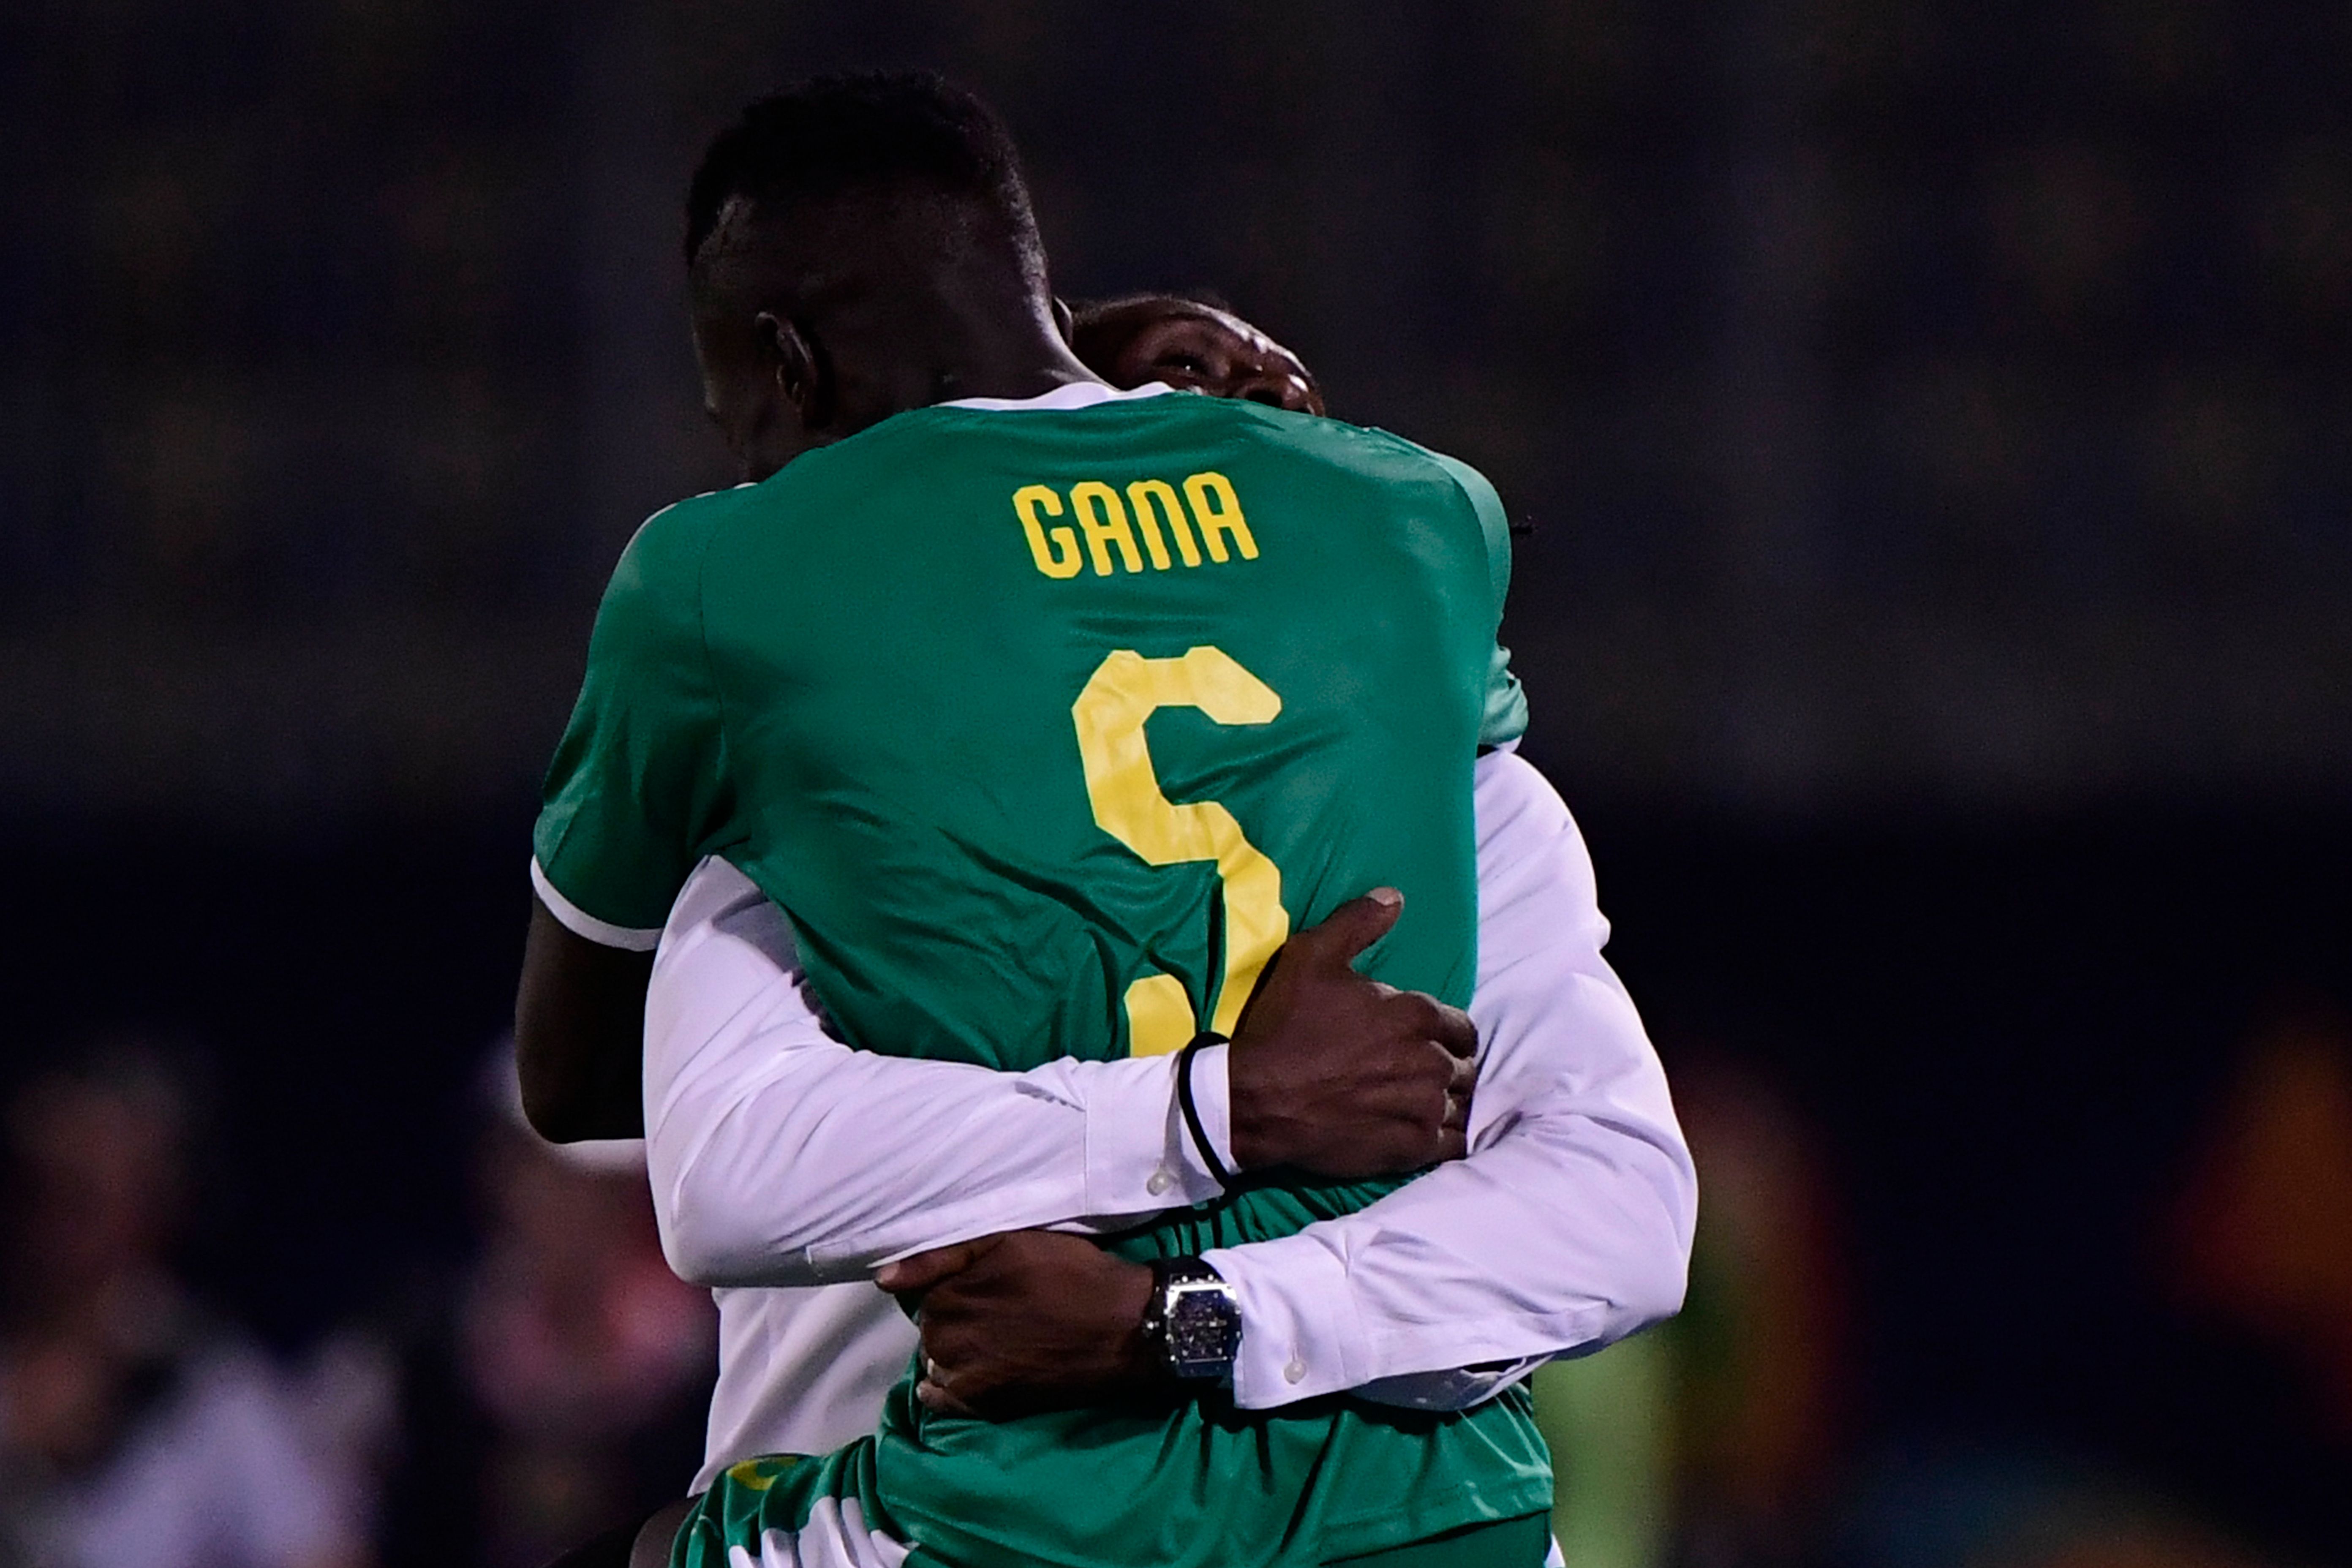 Senegal's midfielder Idrissa Gueye celebrates the win with Senegal's coach Aliou Cisse during the 2019 Africa Cup of Nations (CAN) quarter final football match between Senegal and Benin at the 30 June stadium in Cairo on July 9, 2019. (Photo by JAVIER SORIANO / AFP)        (Photo credit should read JAVIER SORIANO/AFP/Getty Images)